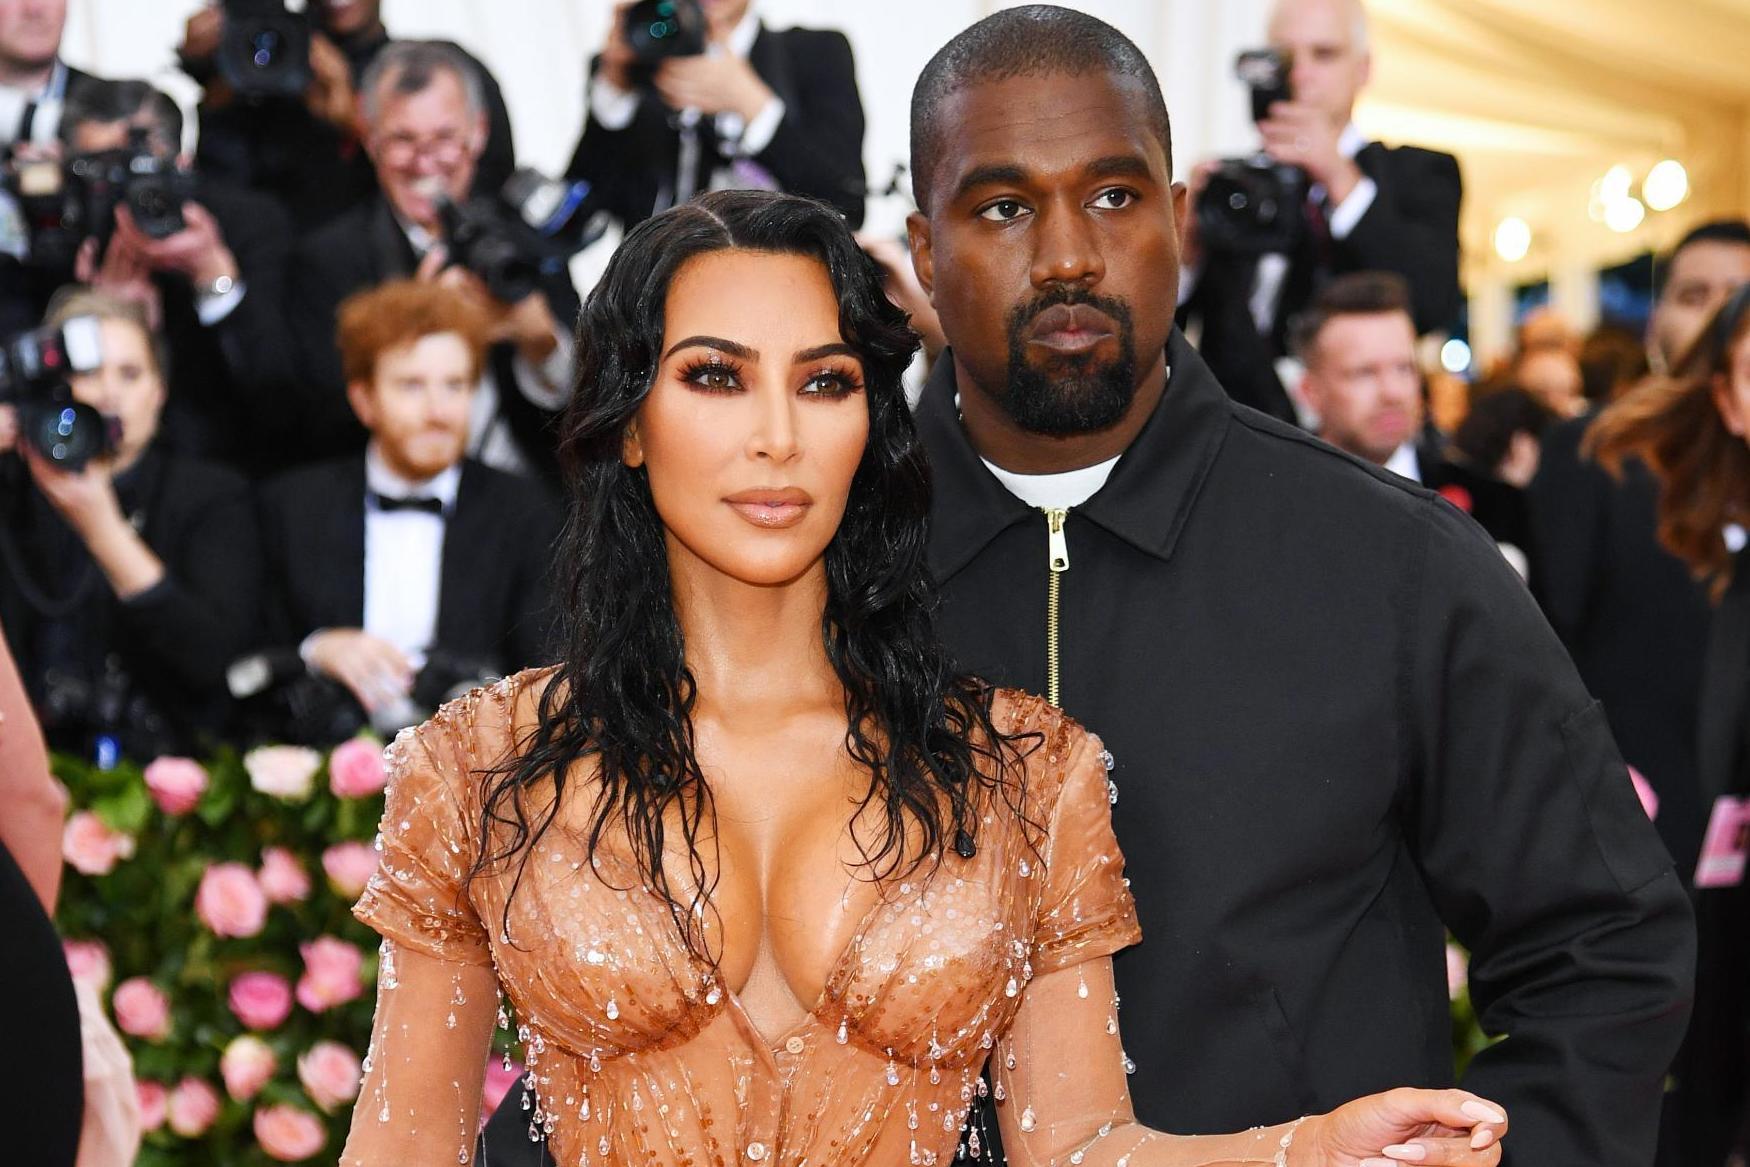 Kim Kardashian shares first up-close look at baby son Psalm West